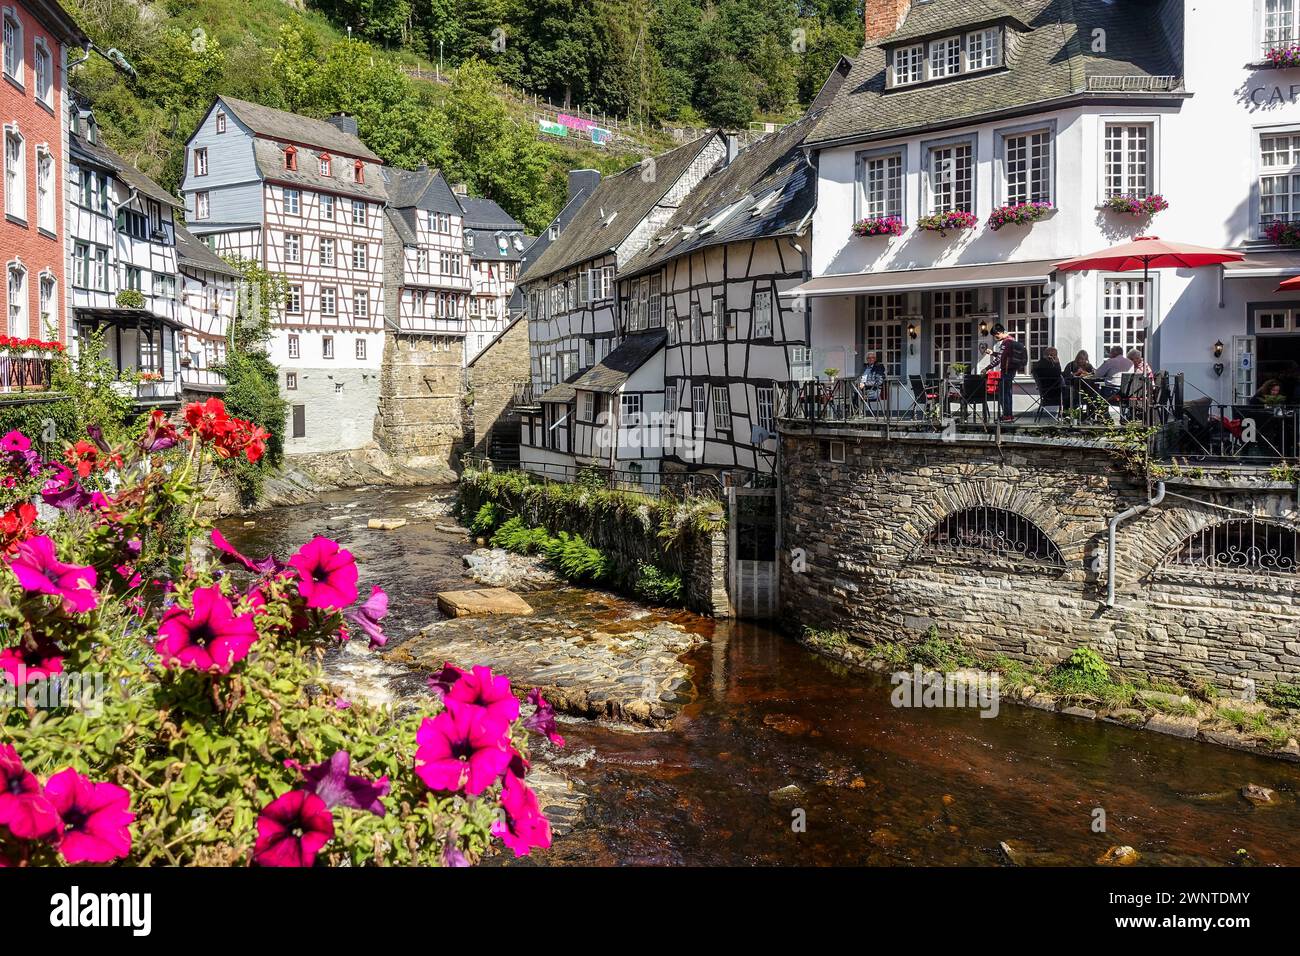 Quaint European village (Monschau, Germany) with half-timbered houses and a flower-lined bridge over a creek, with green hills in the background Stock Photo